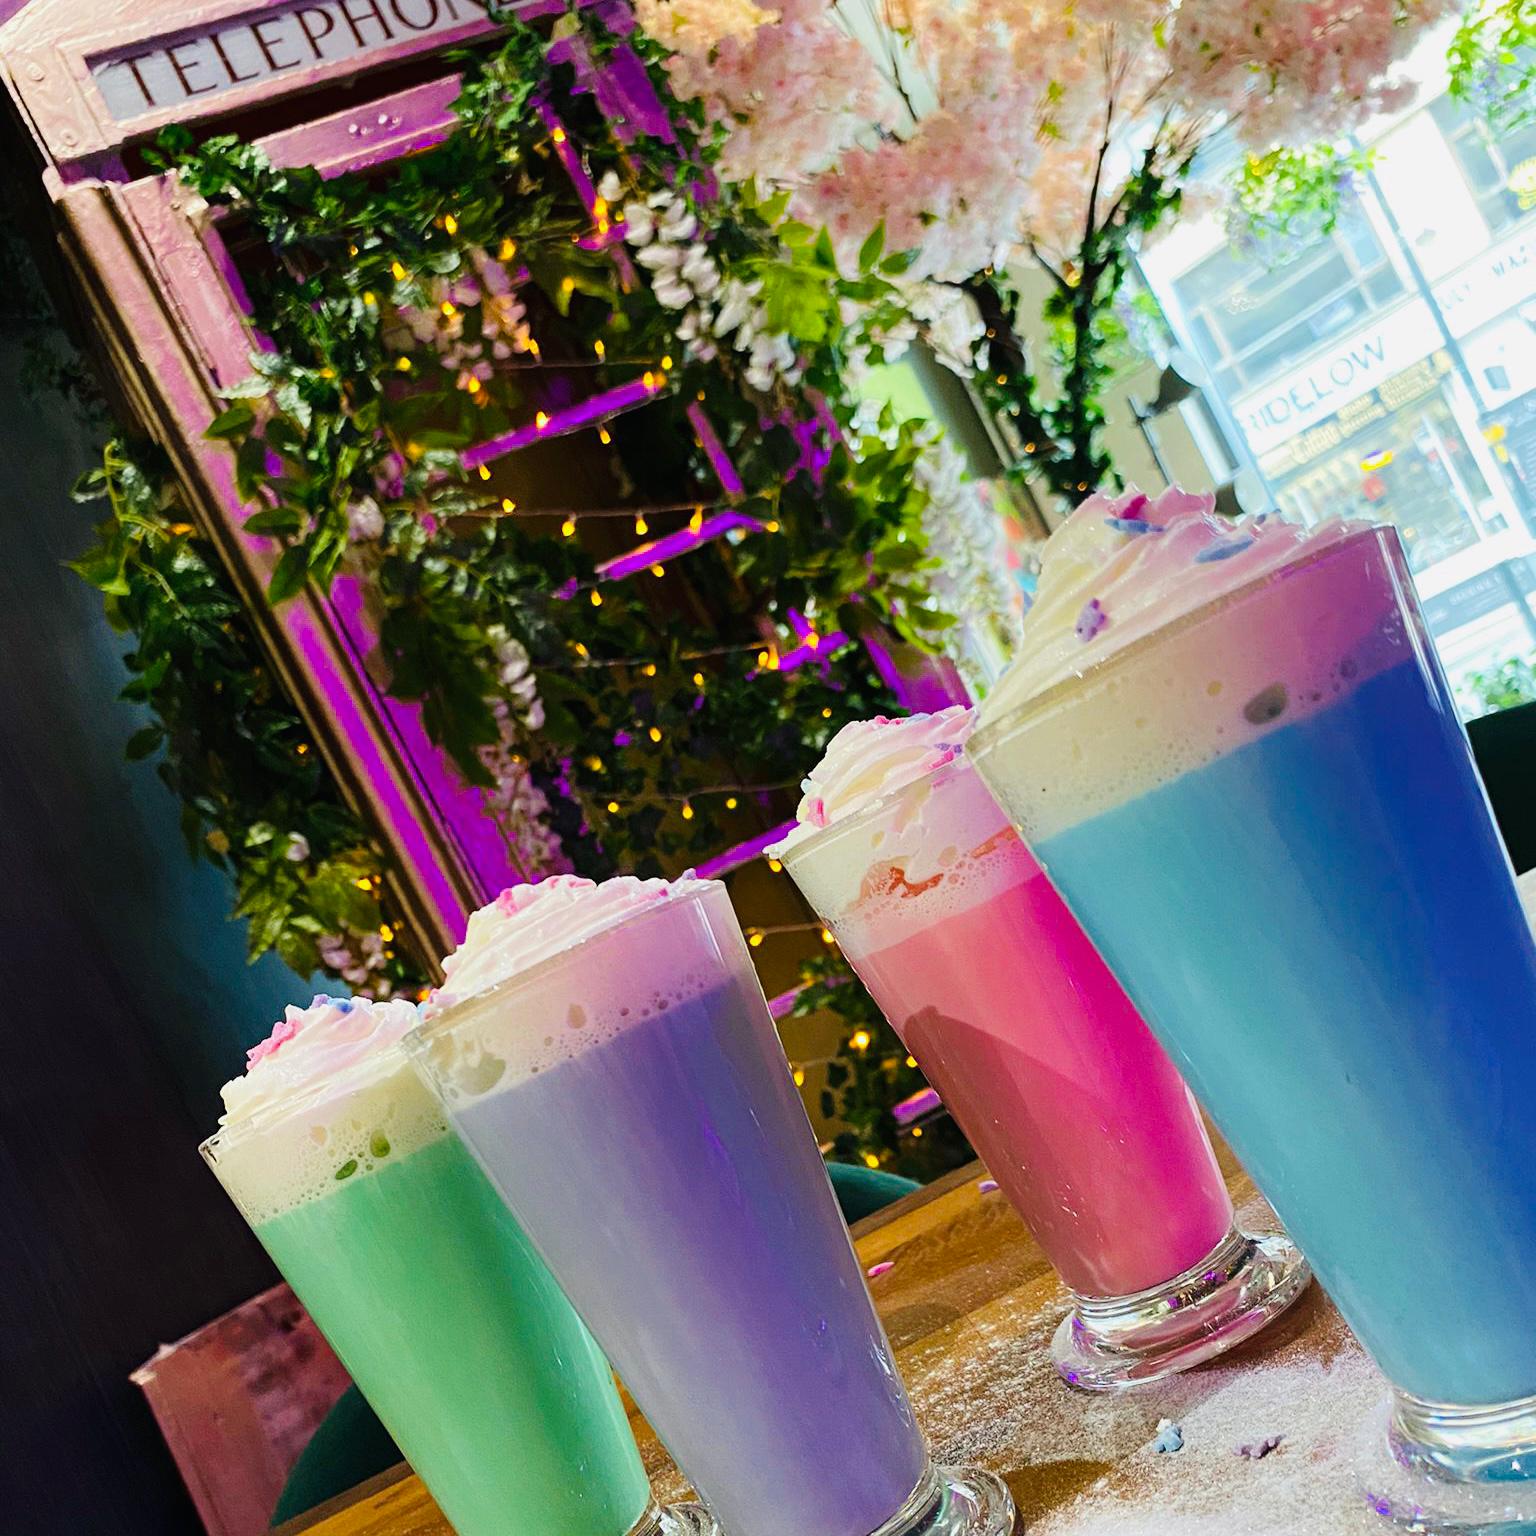 A new &#8216;Instagrammable&#8217; cafe bar with colourful coffees and cocktails in glass slippers has opened in Manchester, The Manc